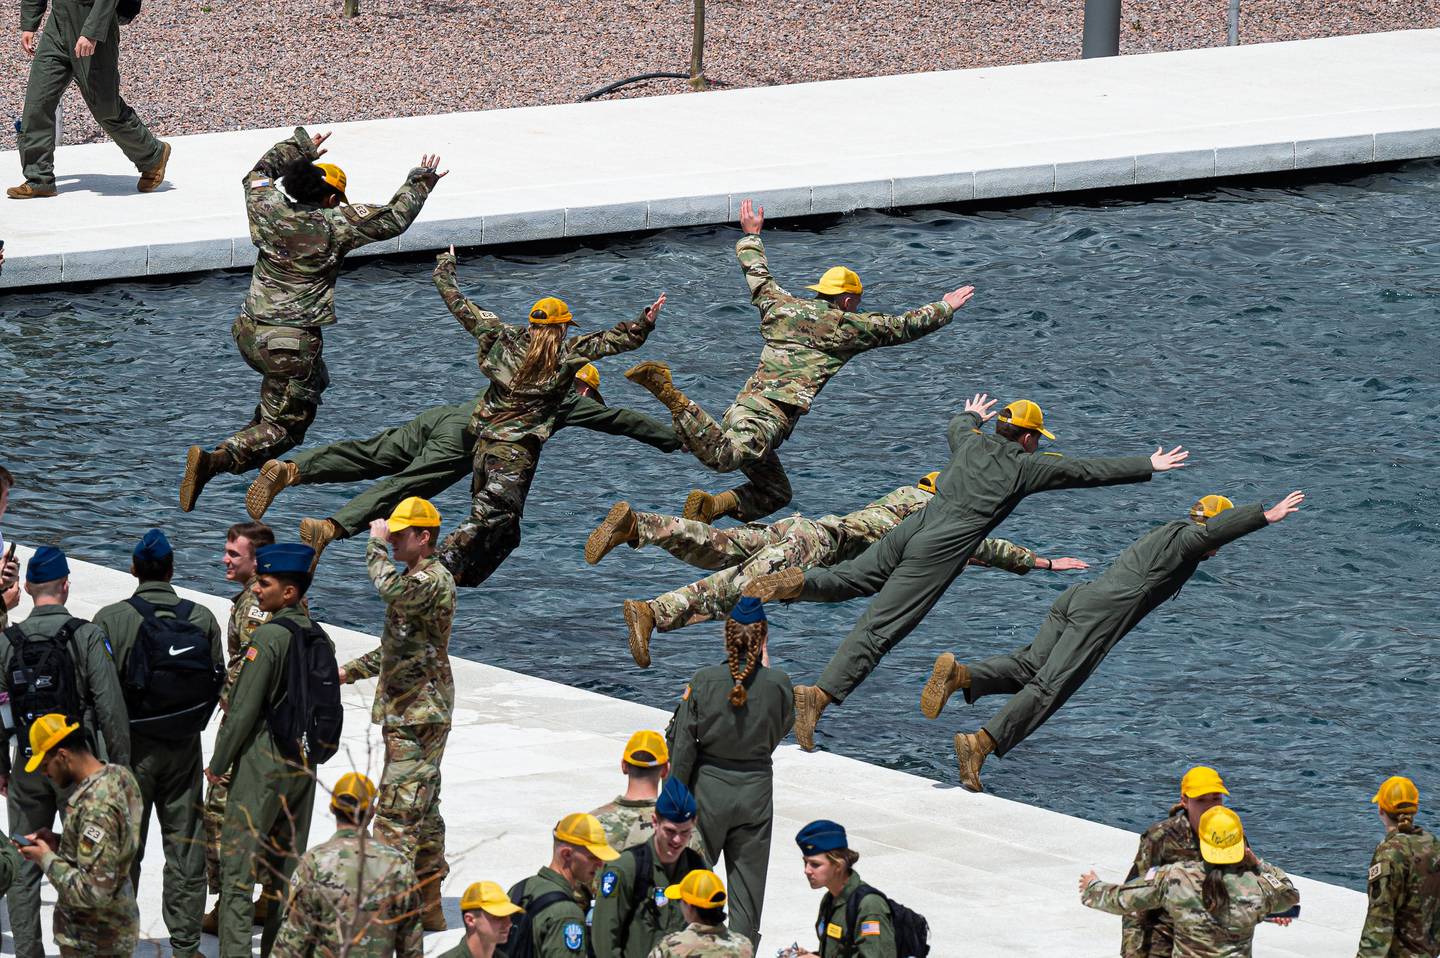 Prior to their upcoming graduation, senior Air Force Academy cadets continue the tradition of jumping into the Terazzo's Air Garden fountains to celebrate the completion of final exams at the Air Force Academy in Colorado Springs, Colo., on May 12, 2023.